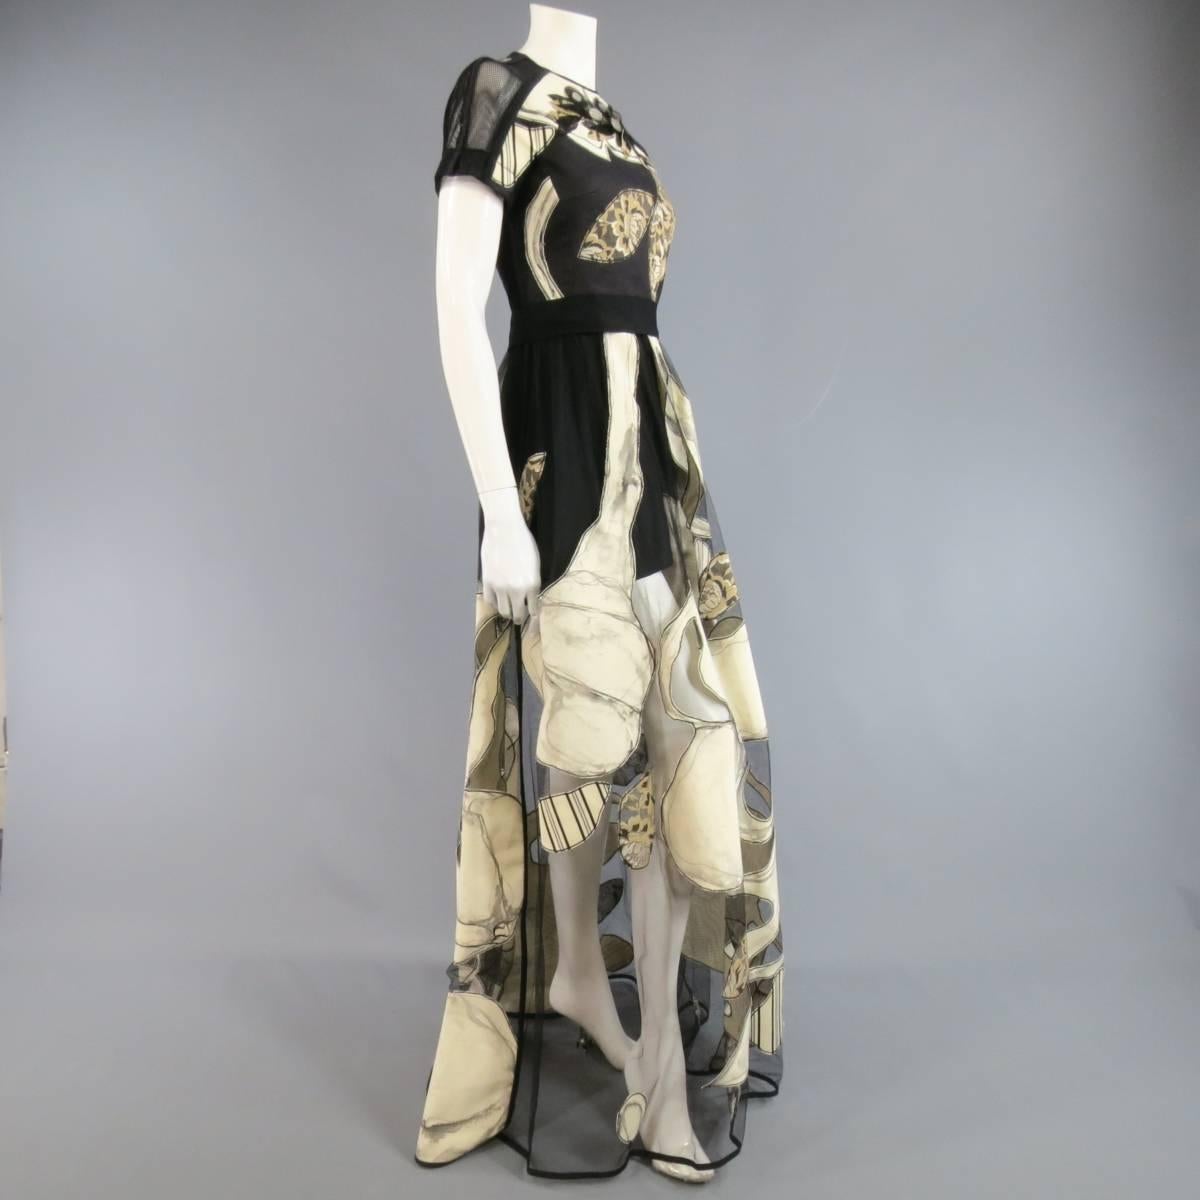 ANTONIO MARRAS Size 4 Black & Beige Painted Floral Mesh Tulle Evening Gown 3